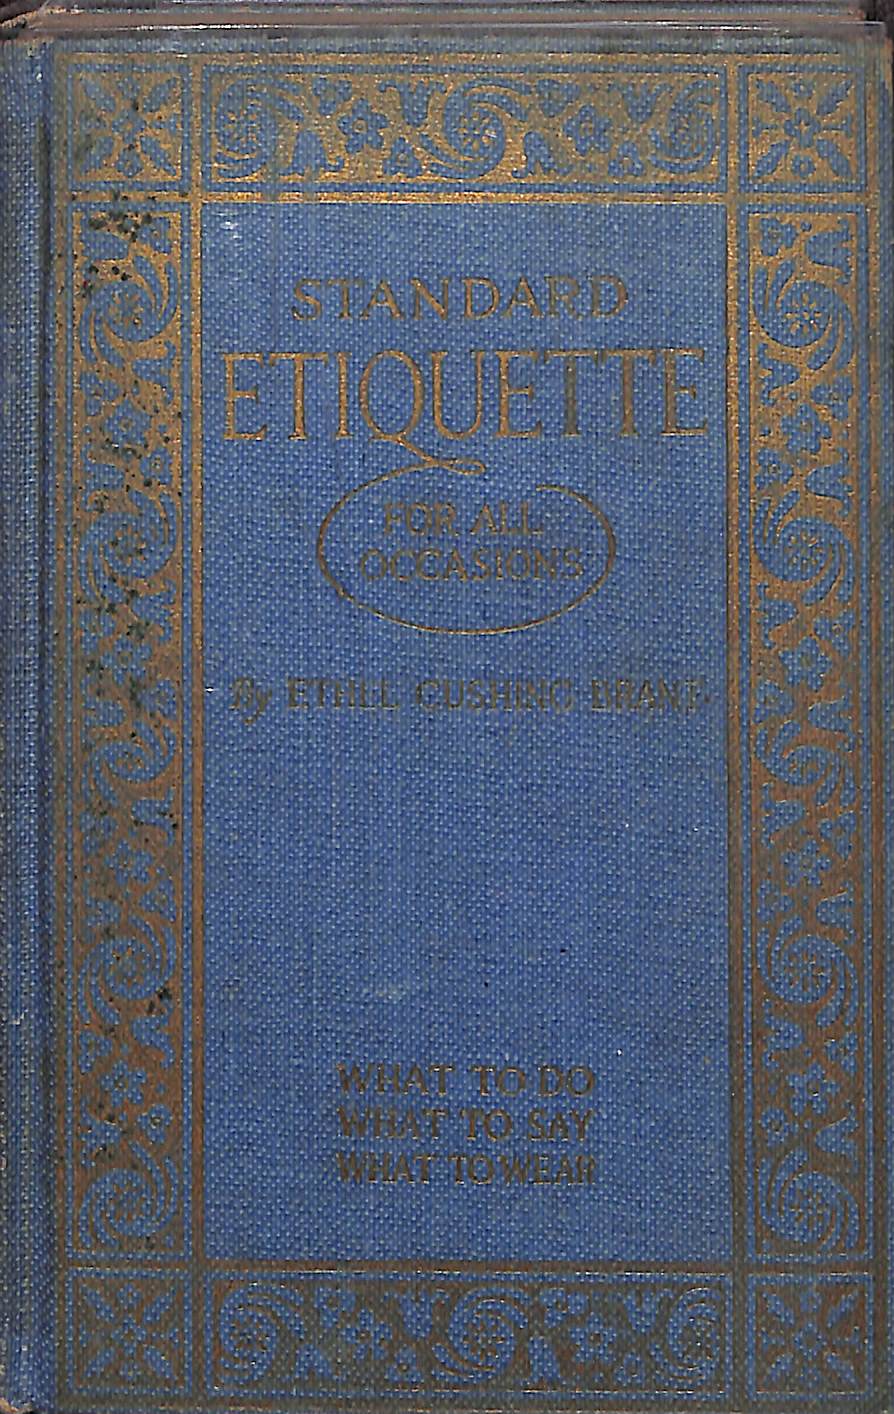 "Standard Etiquette For All Occasions" 1925 BRANT, Ethel Cushing